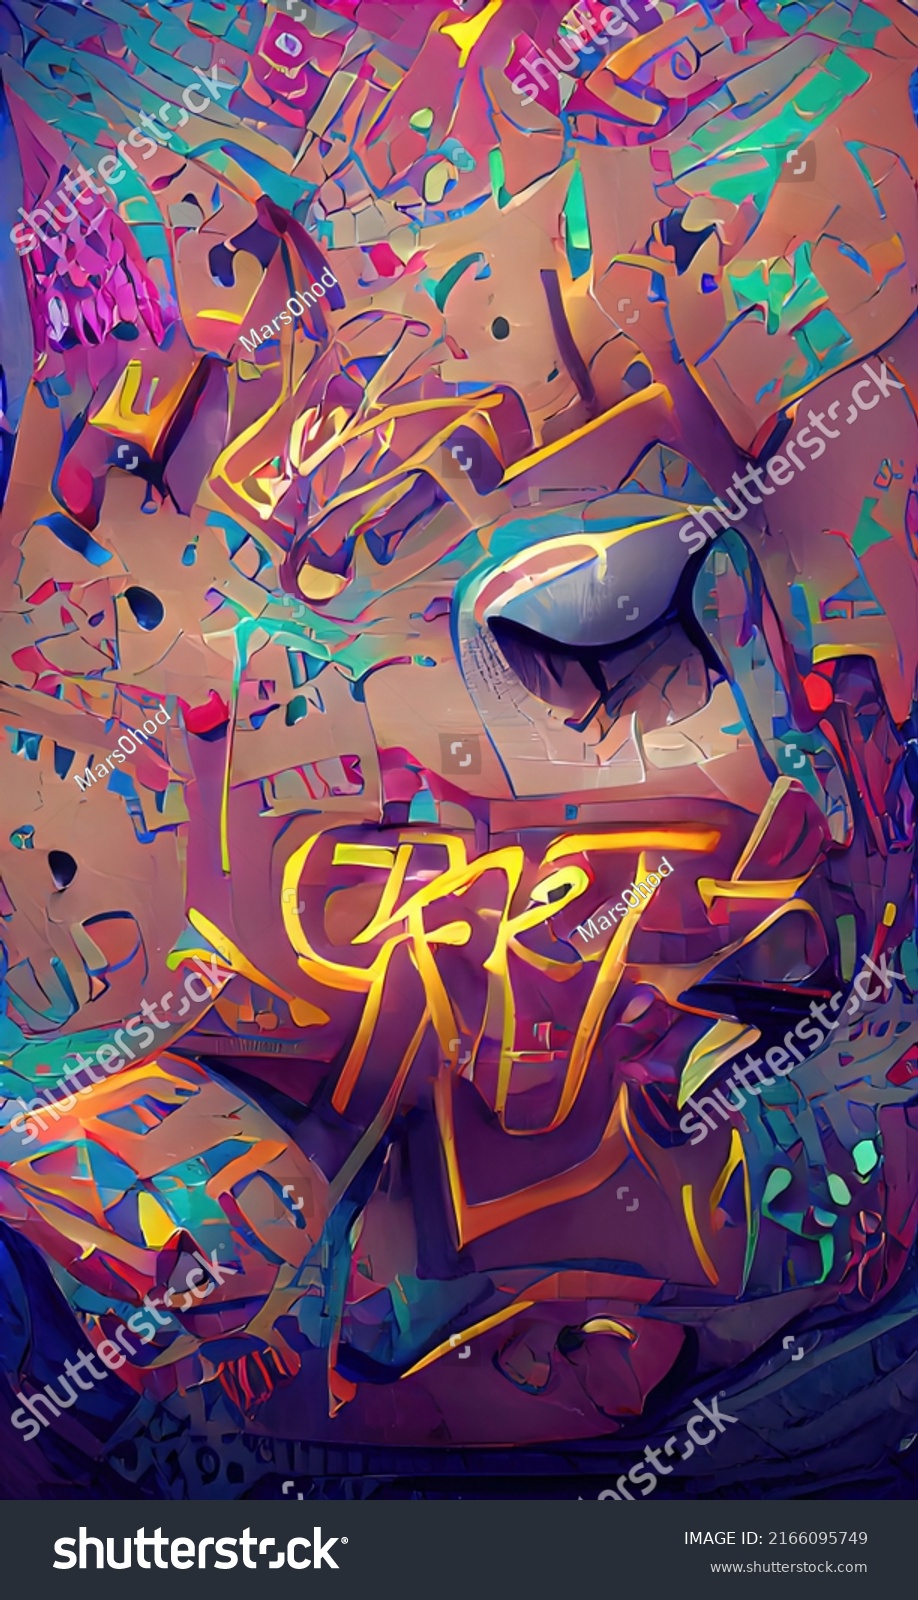 51 Graffiti and graphite and hip hop and graphite Images, Stock Photos ...